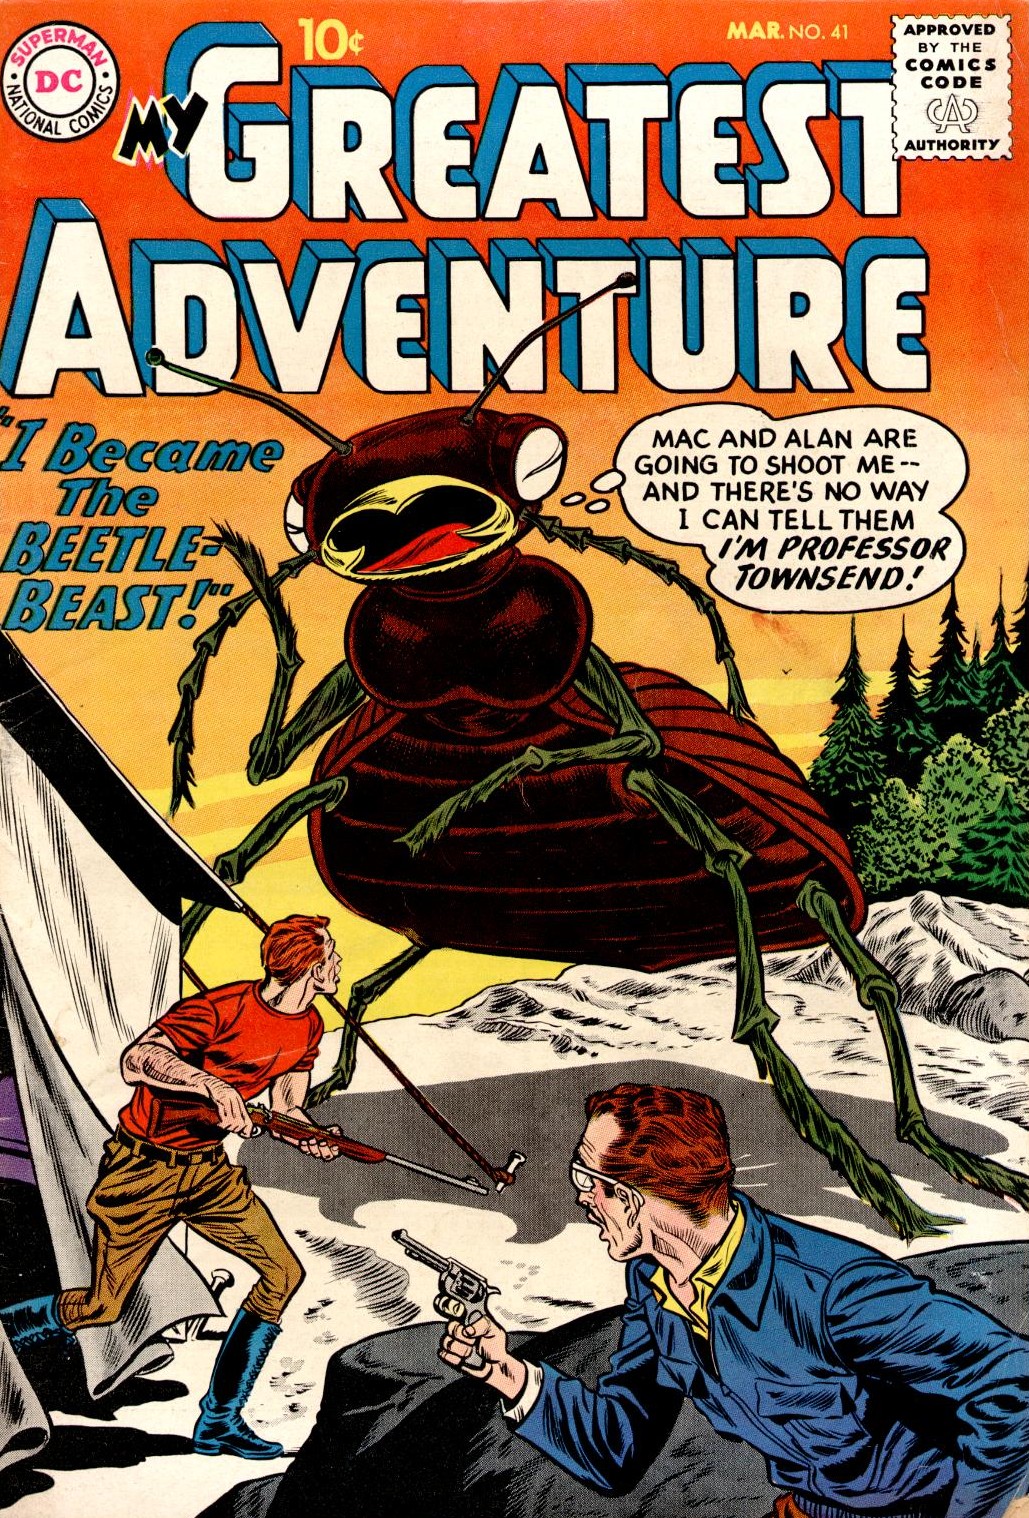 My Greatest Adventure (1955) issue 41 - Page 1